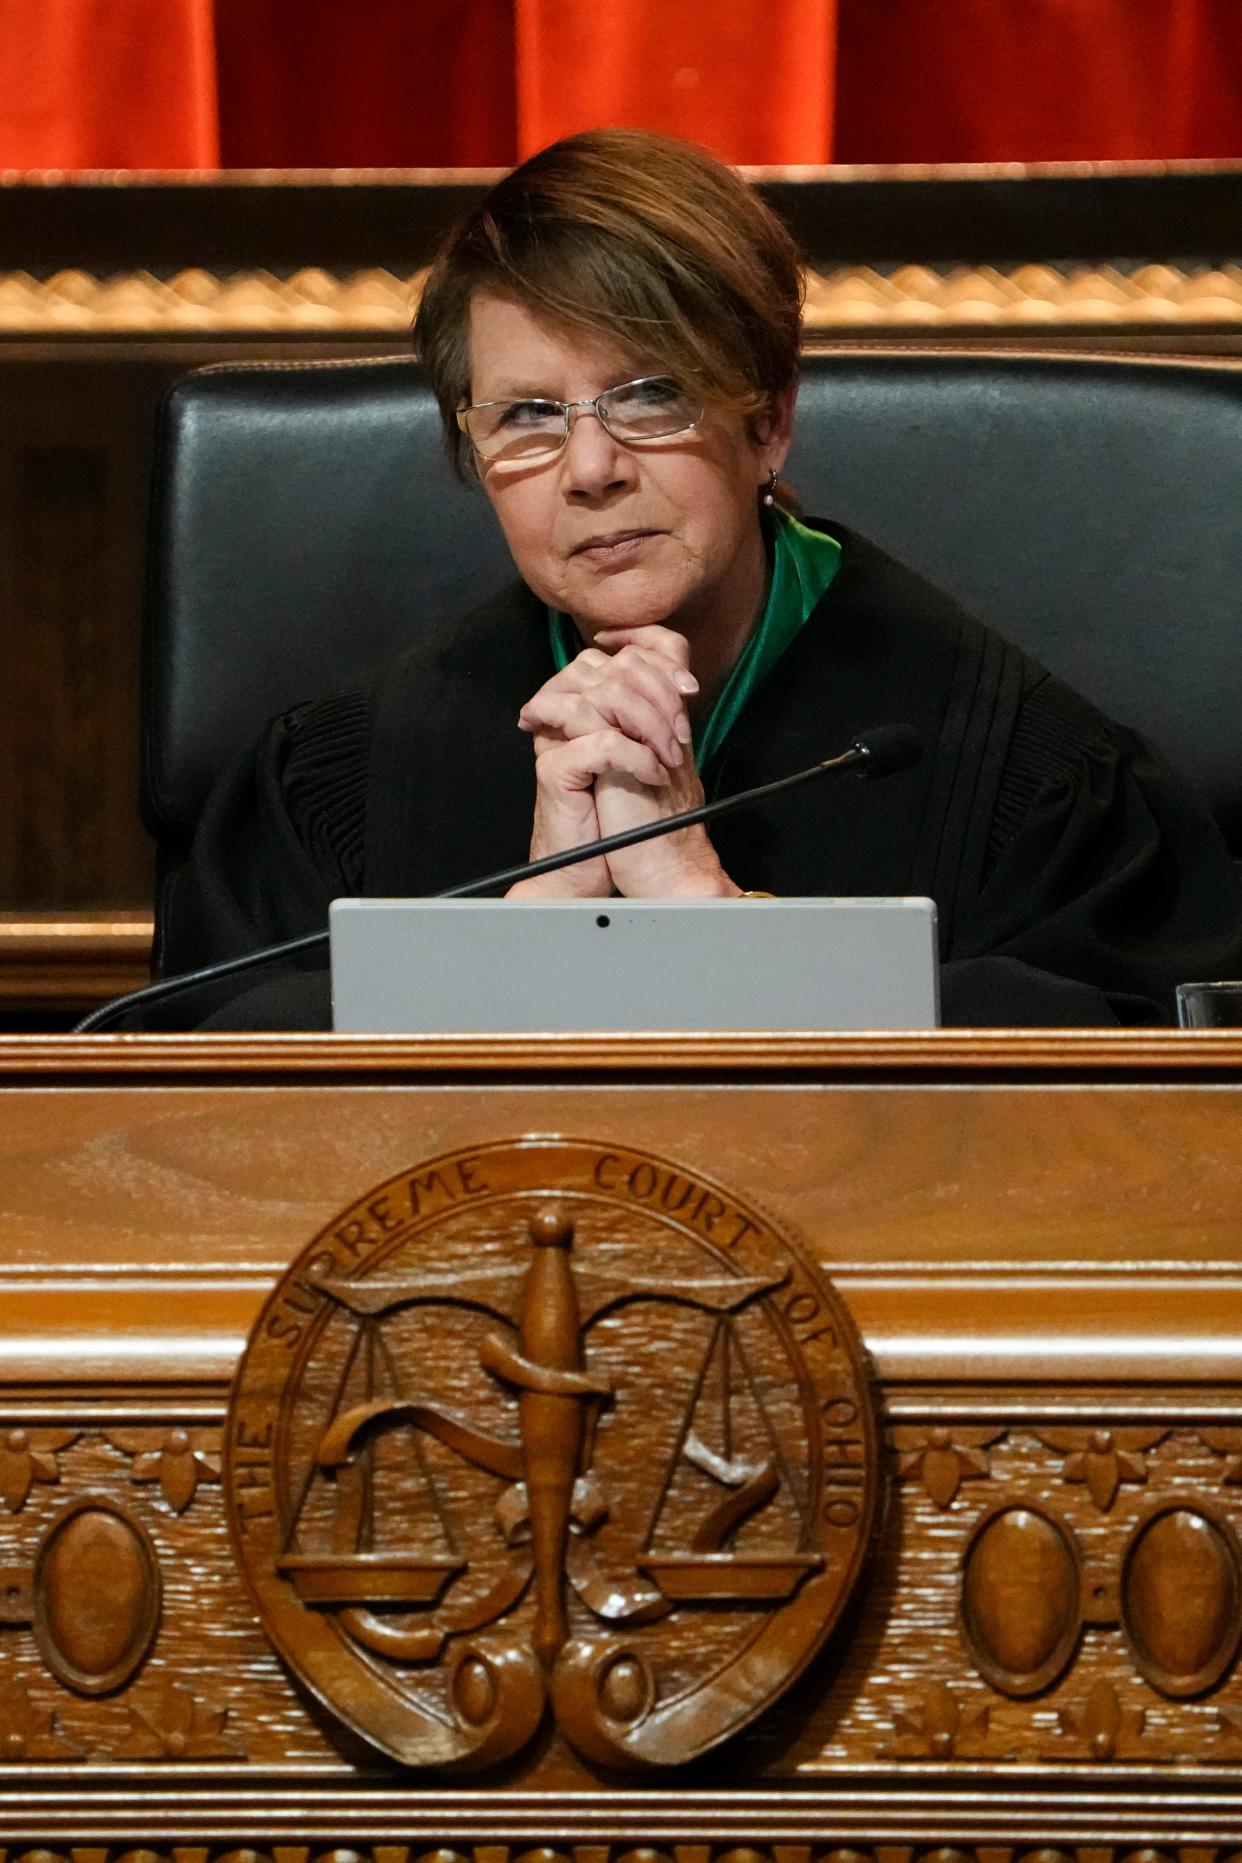 Feb 7, 2023; Columbus, OH, United States;  Ohio Supreme Court Chief Justice Sharon Kennedy listens to oral arguments. Mandatory Credit: Adam Cairns-The Columbus Dispatch